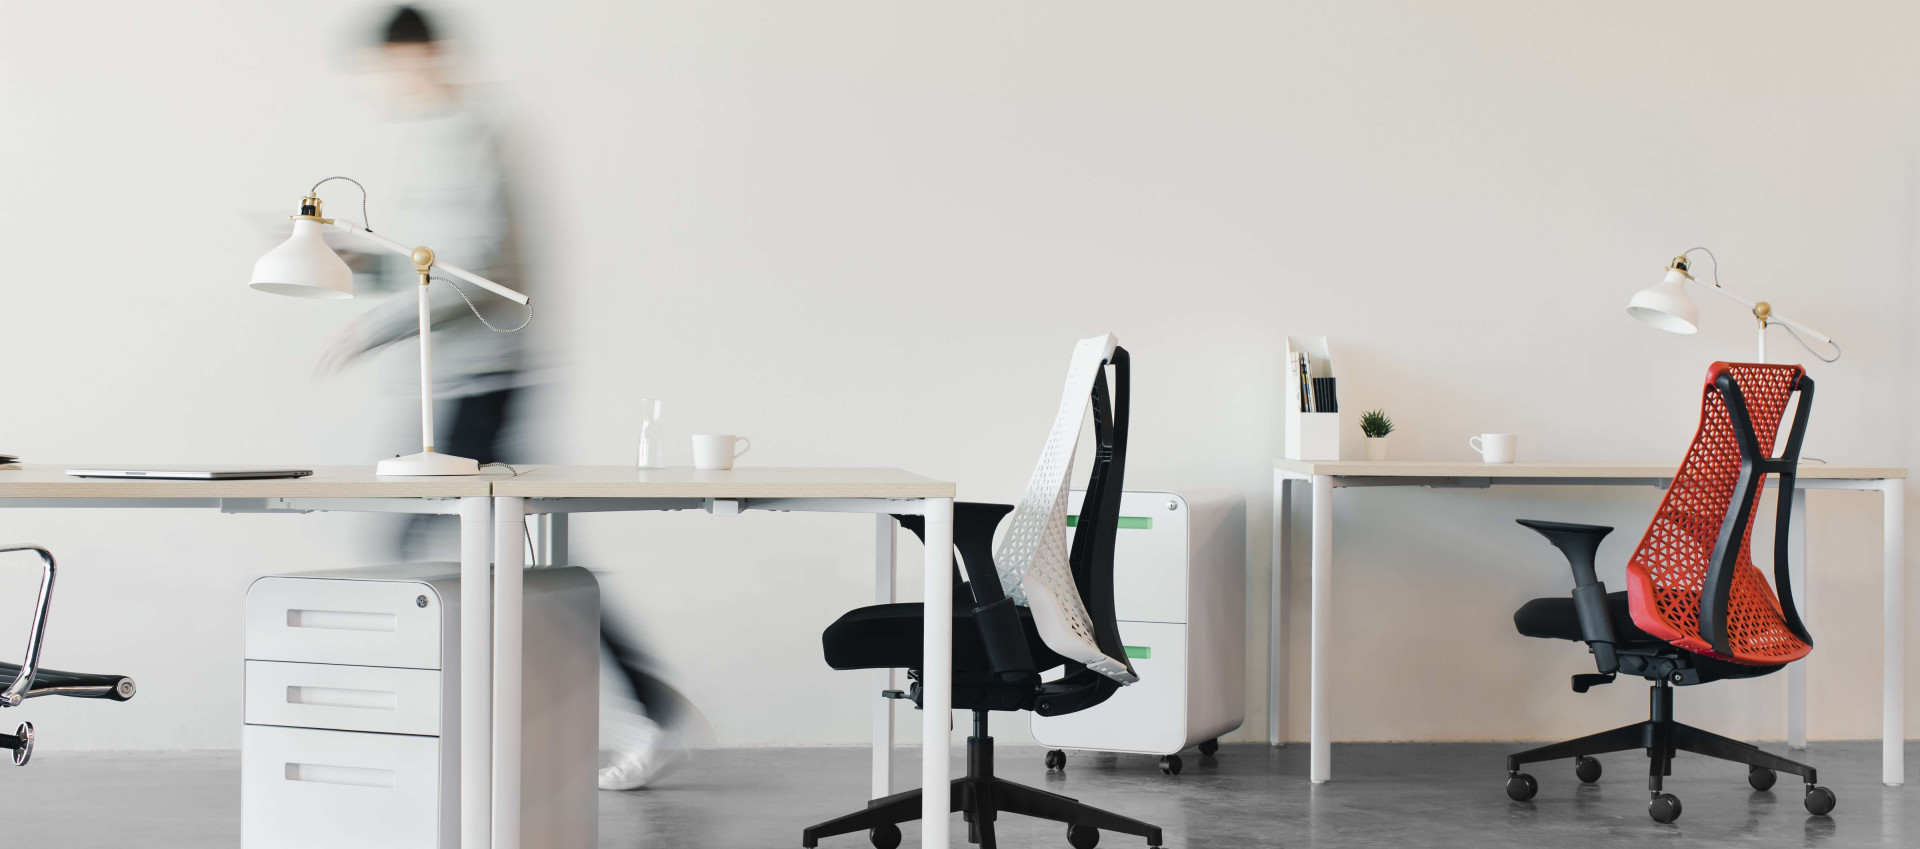 two office chairs and three desks with a blurred person in the background